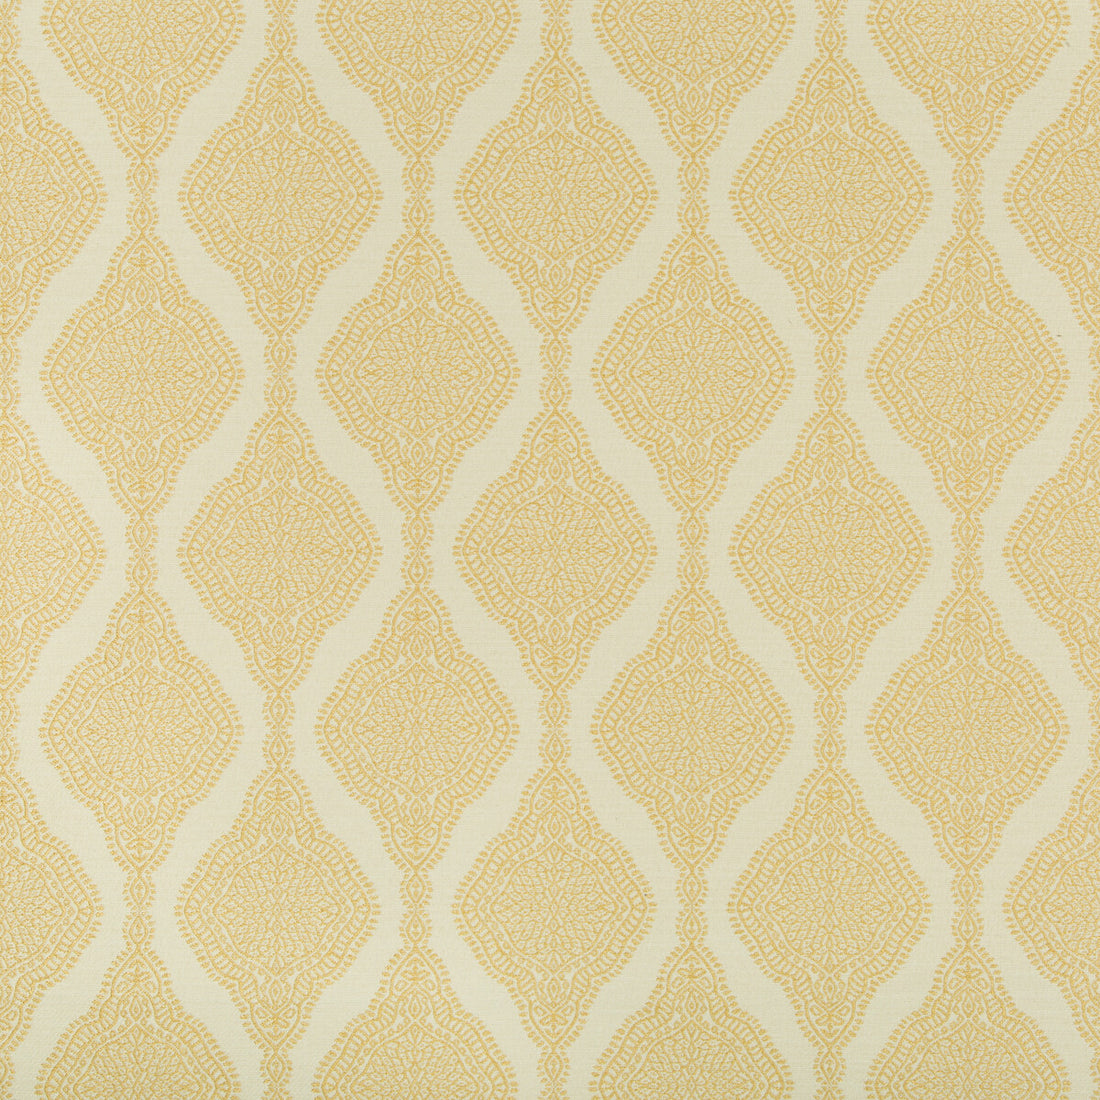 Liliana fabric in honey color - pattern 32935.14.0 - by Kravet Contract in the Gis Crypton collection